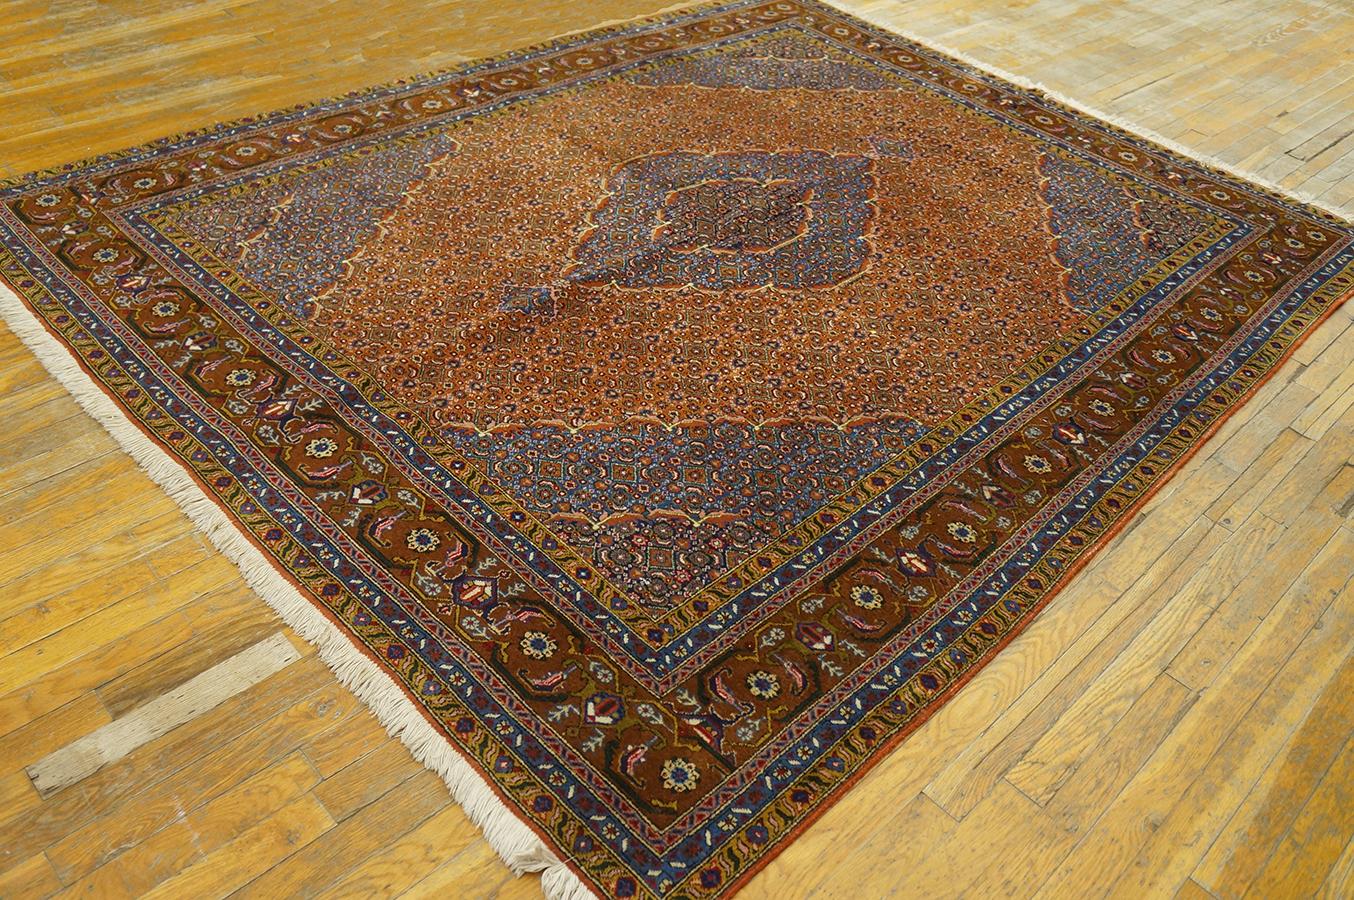 Antique Persian Moud rug, Size: 6' 9''x 8' 0''.